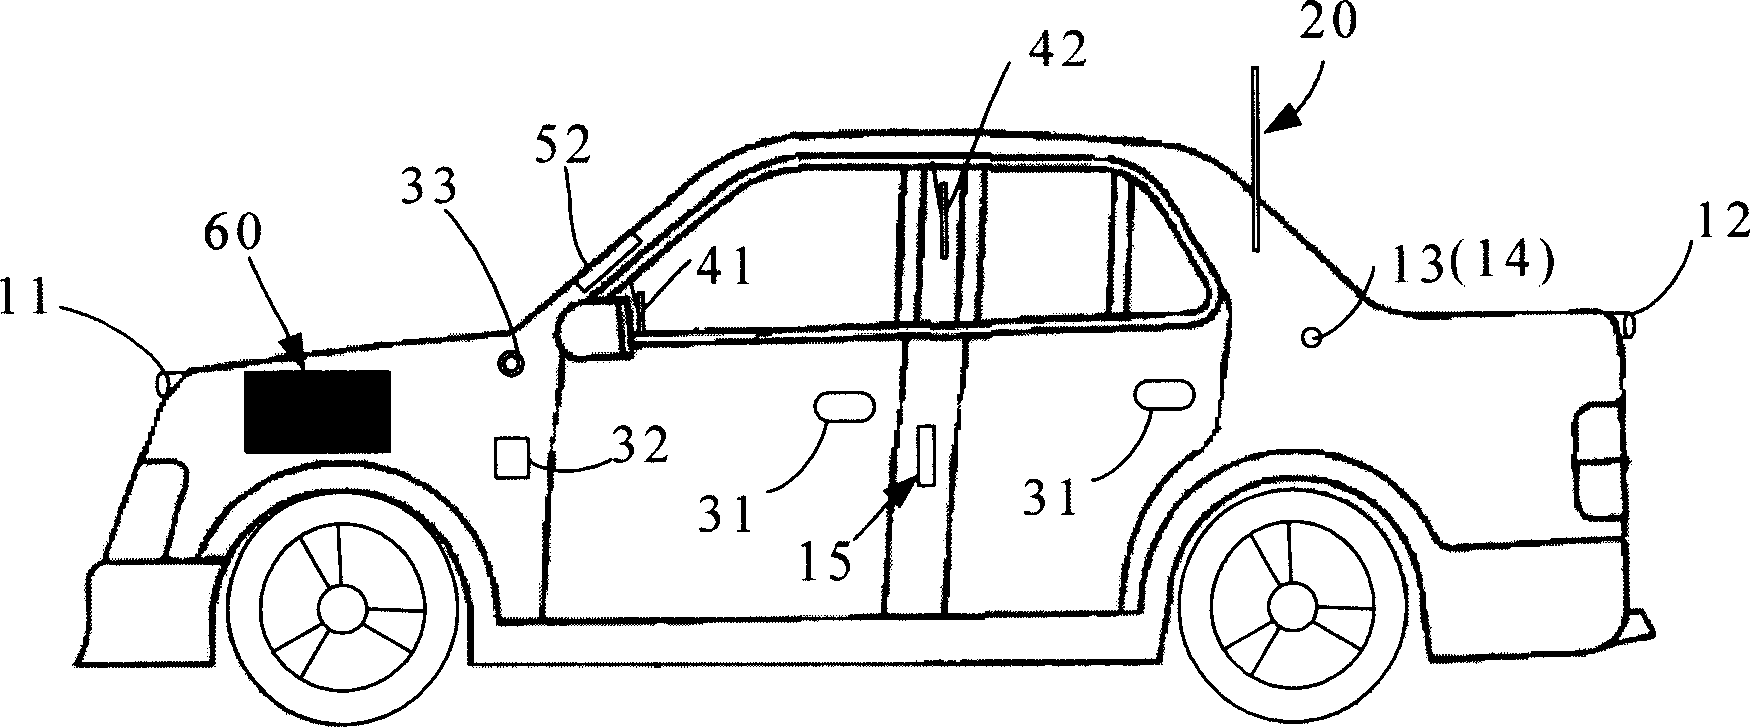 Vehicle network system